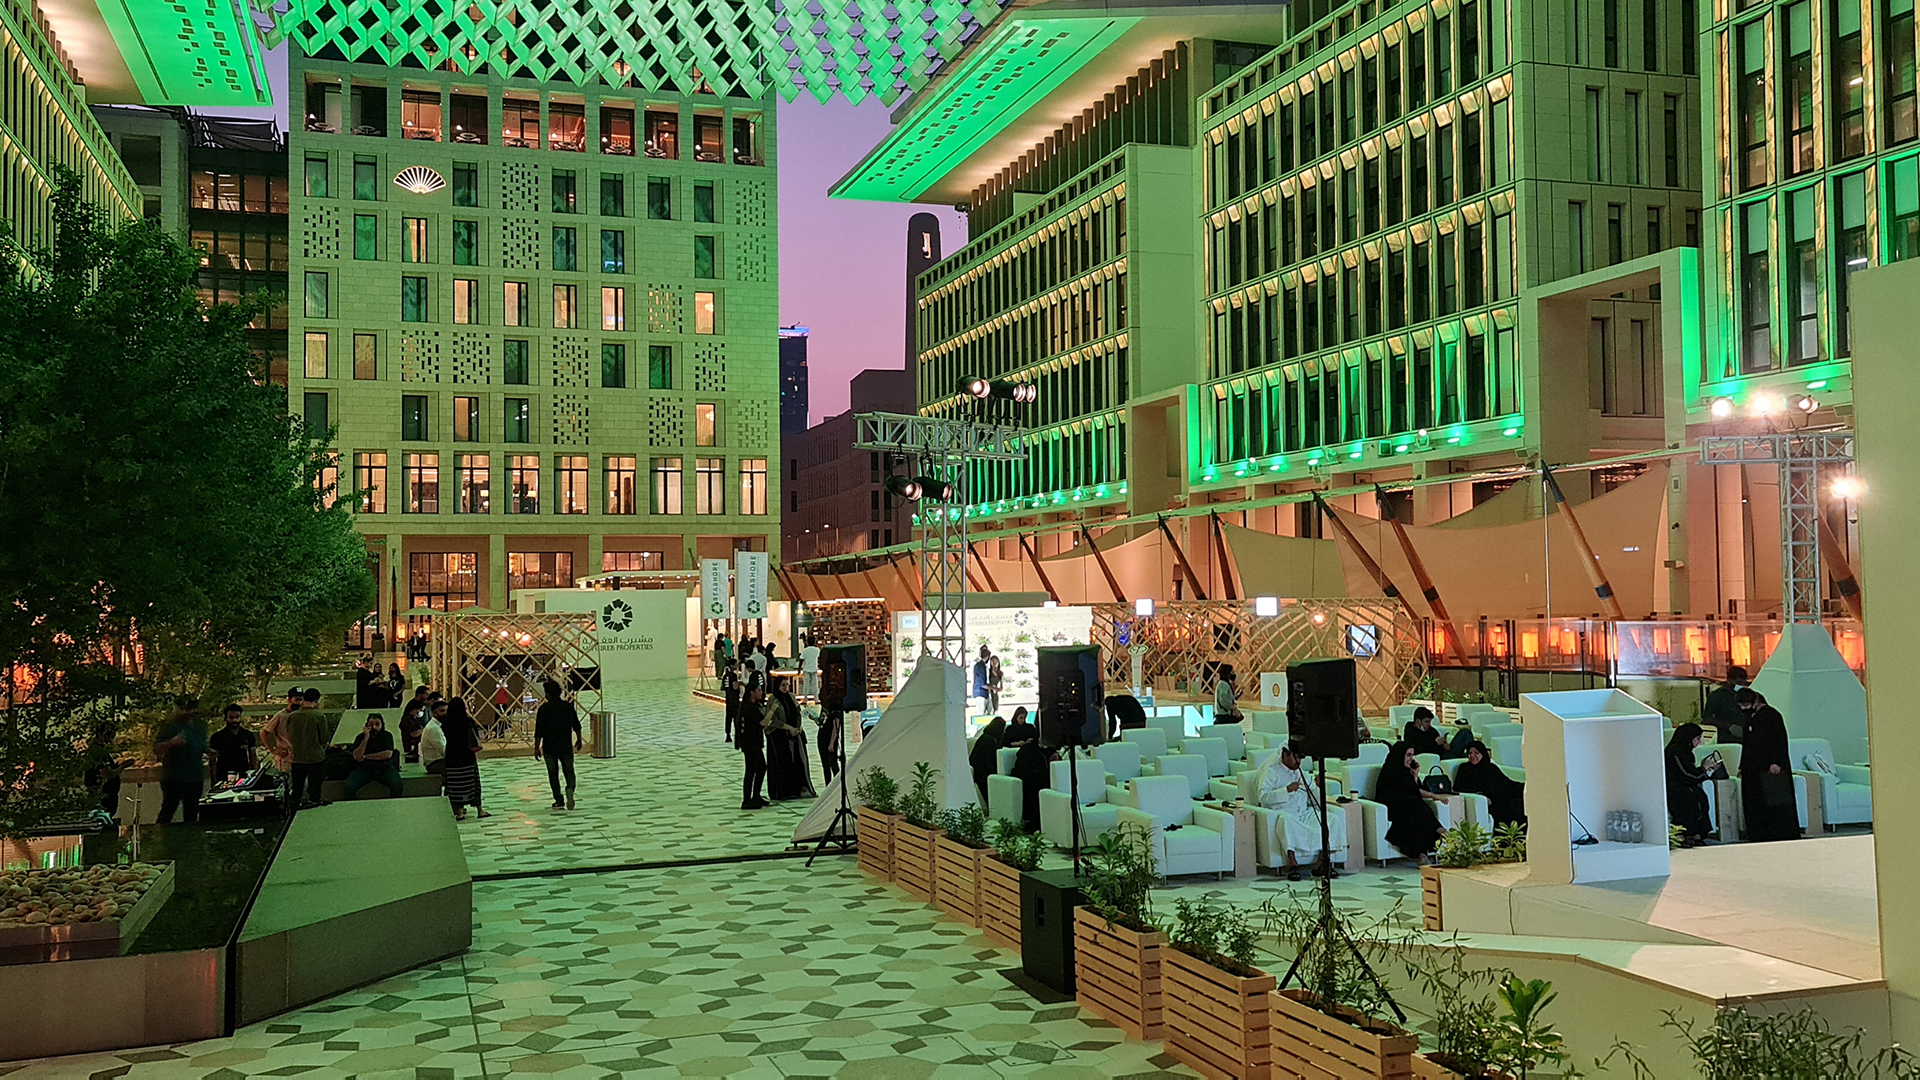 Qatar Sustainability Week 2021 Event designed, built and managed by ME Visual WLL